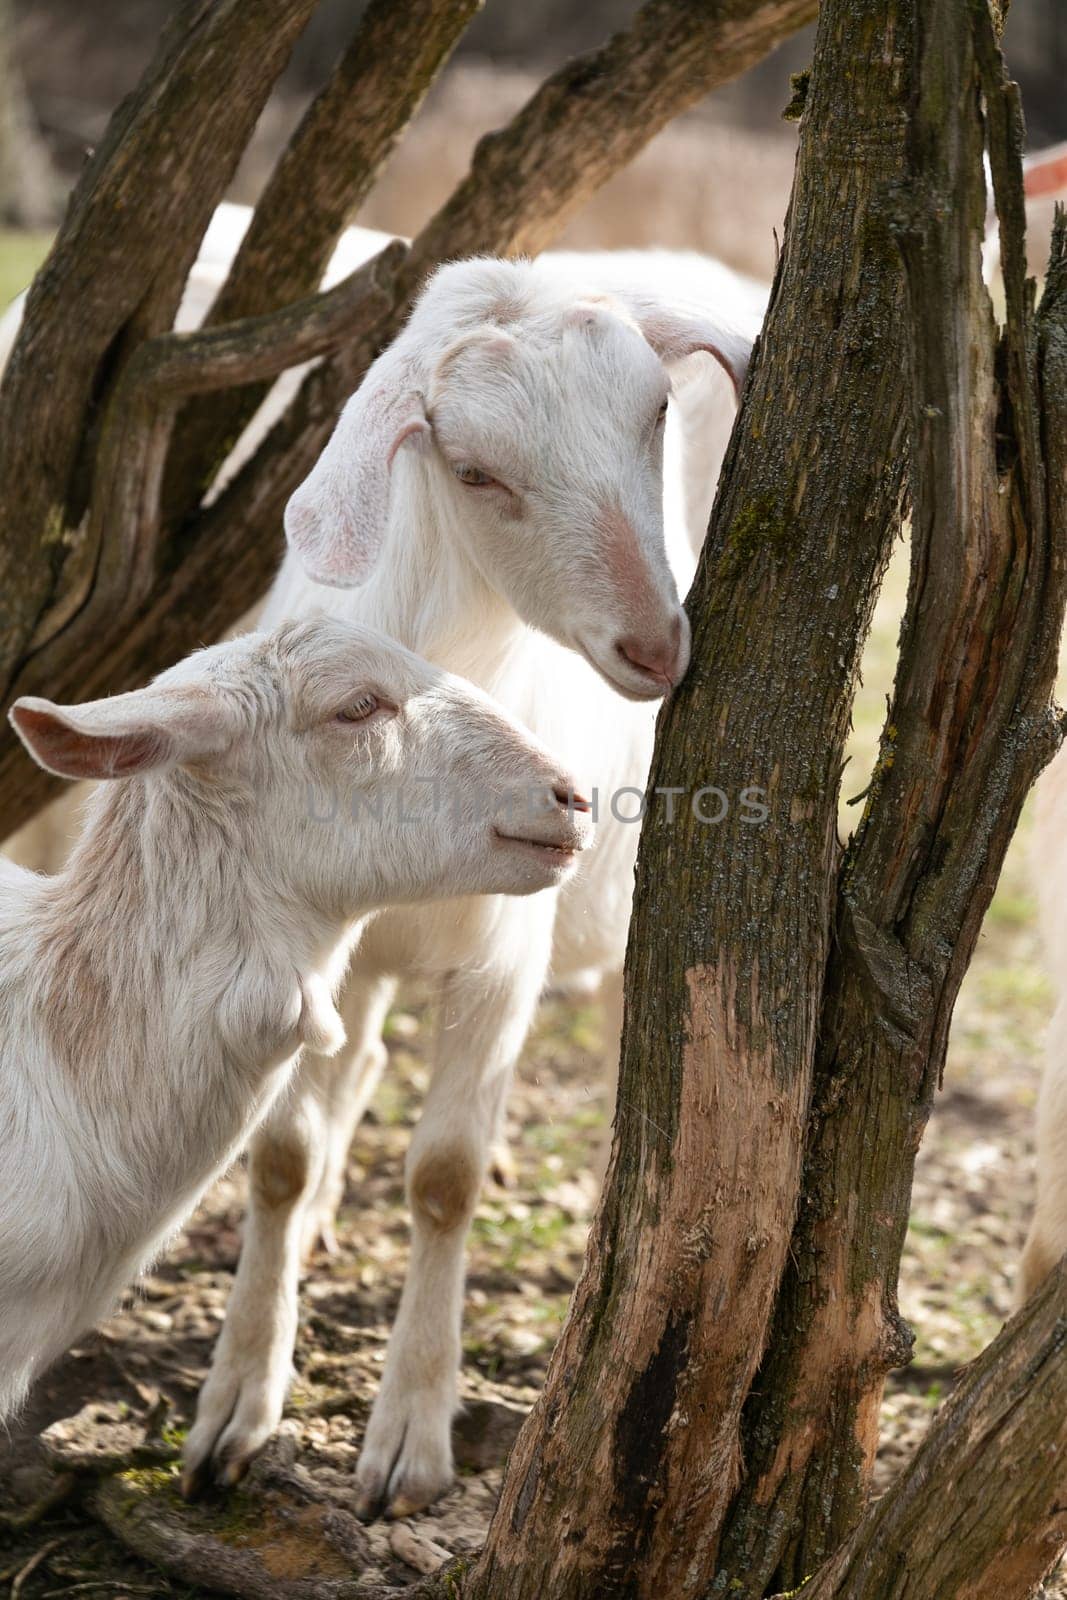 Two Goats Standing Next to a Tree by TRMK